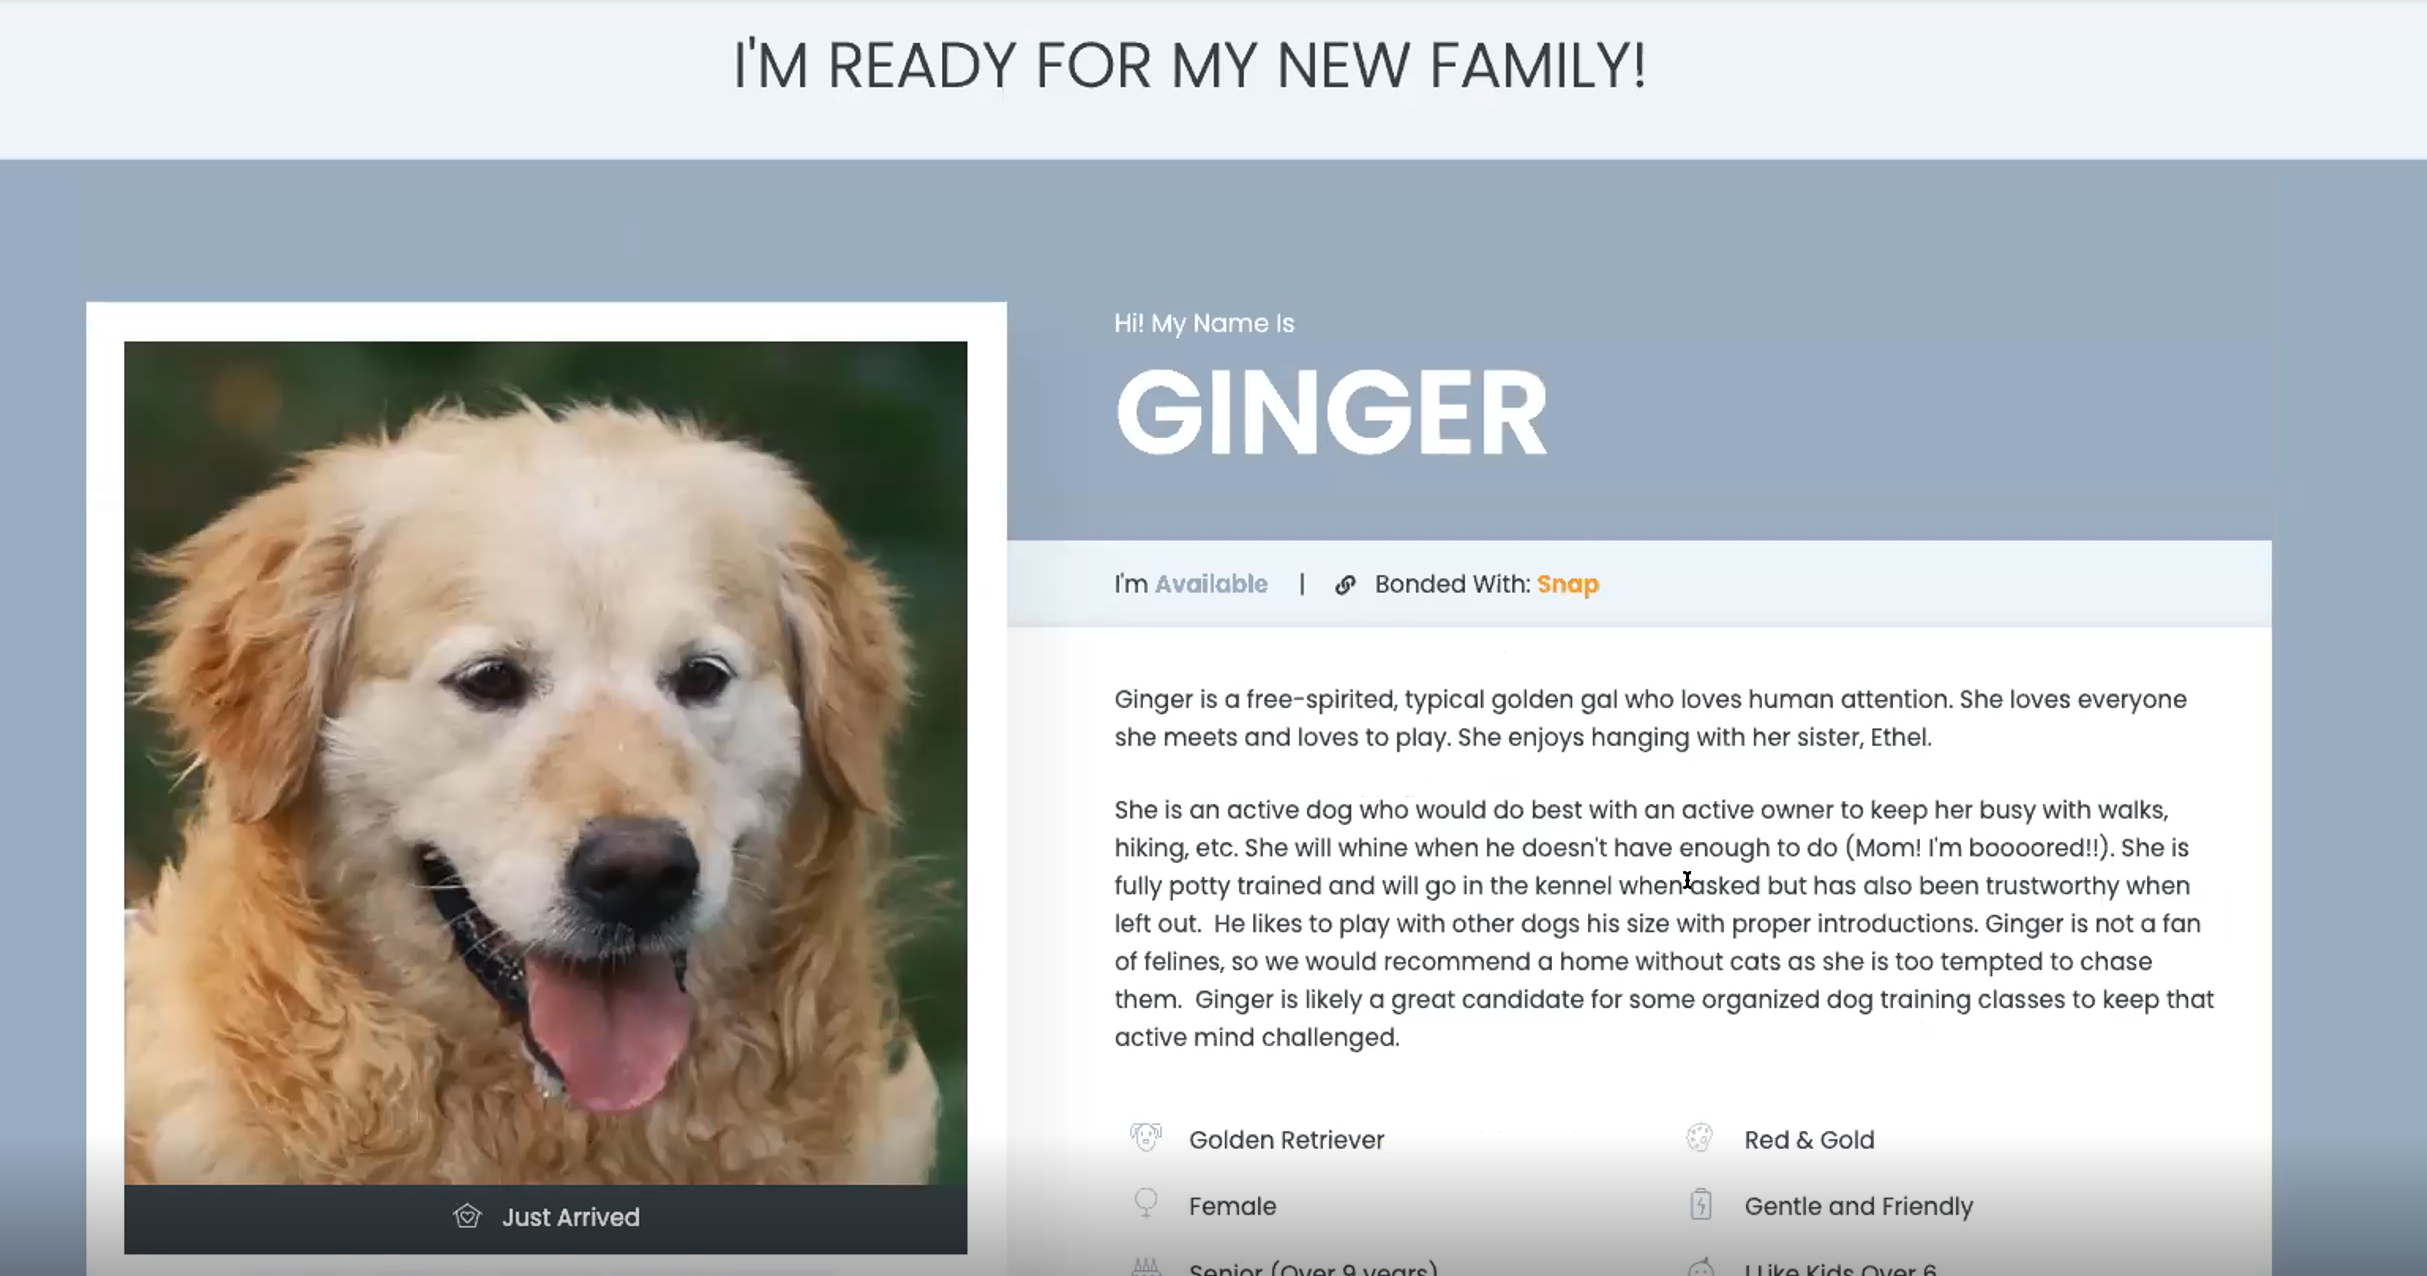 Ginger's profile shows everything we entered on the back-end in a beautiful front-end profile. 